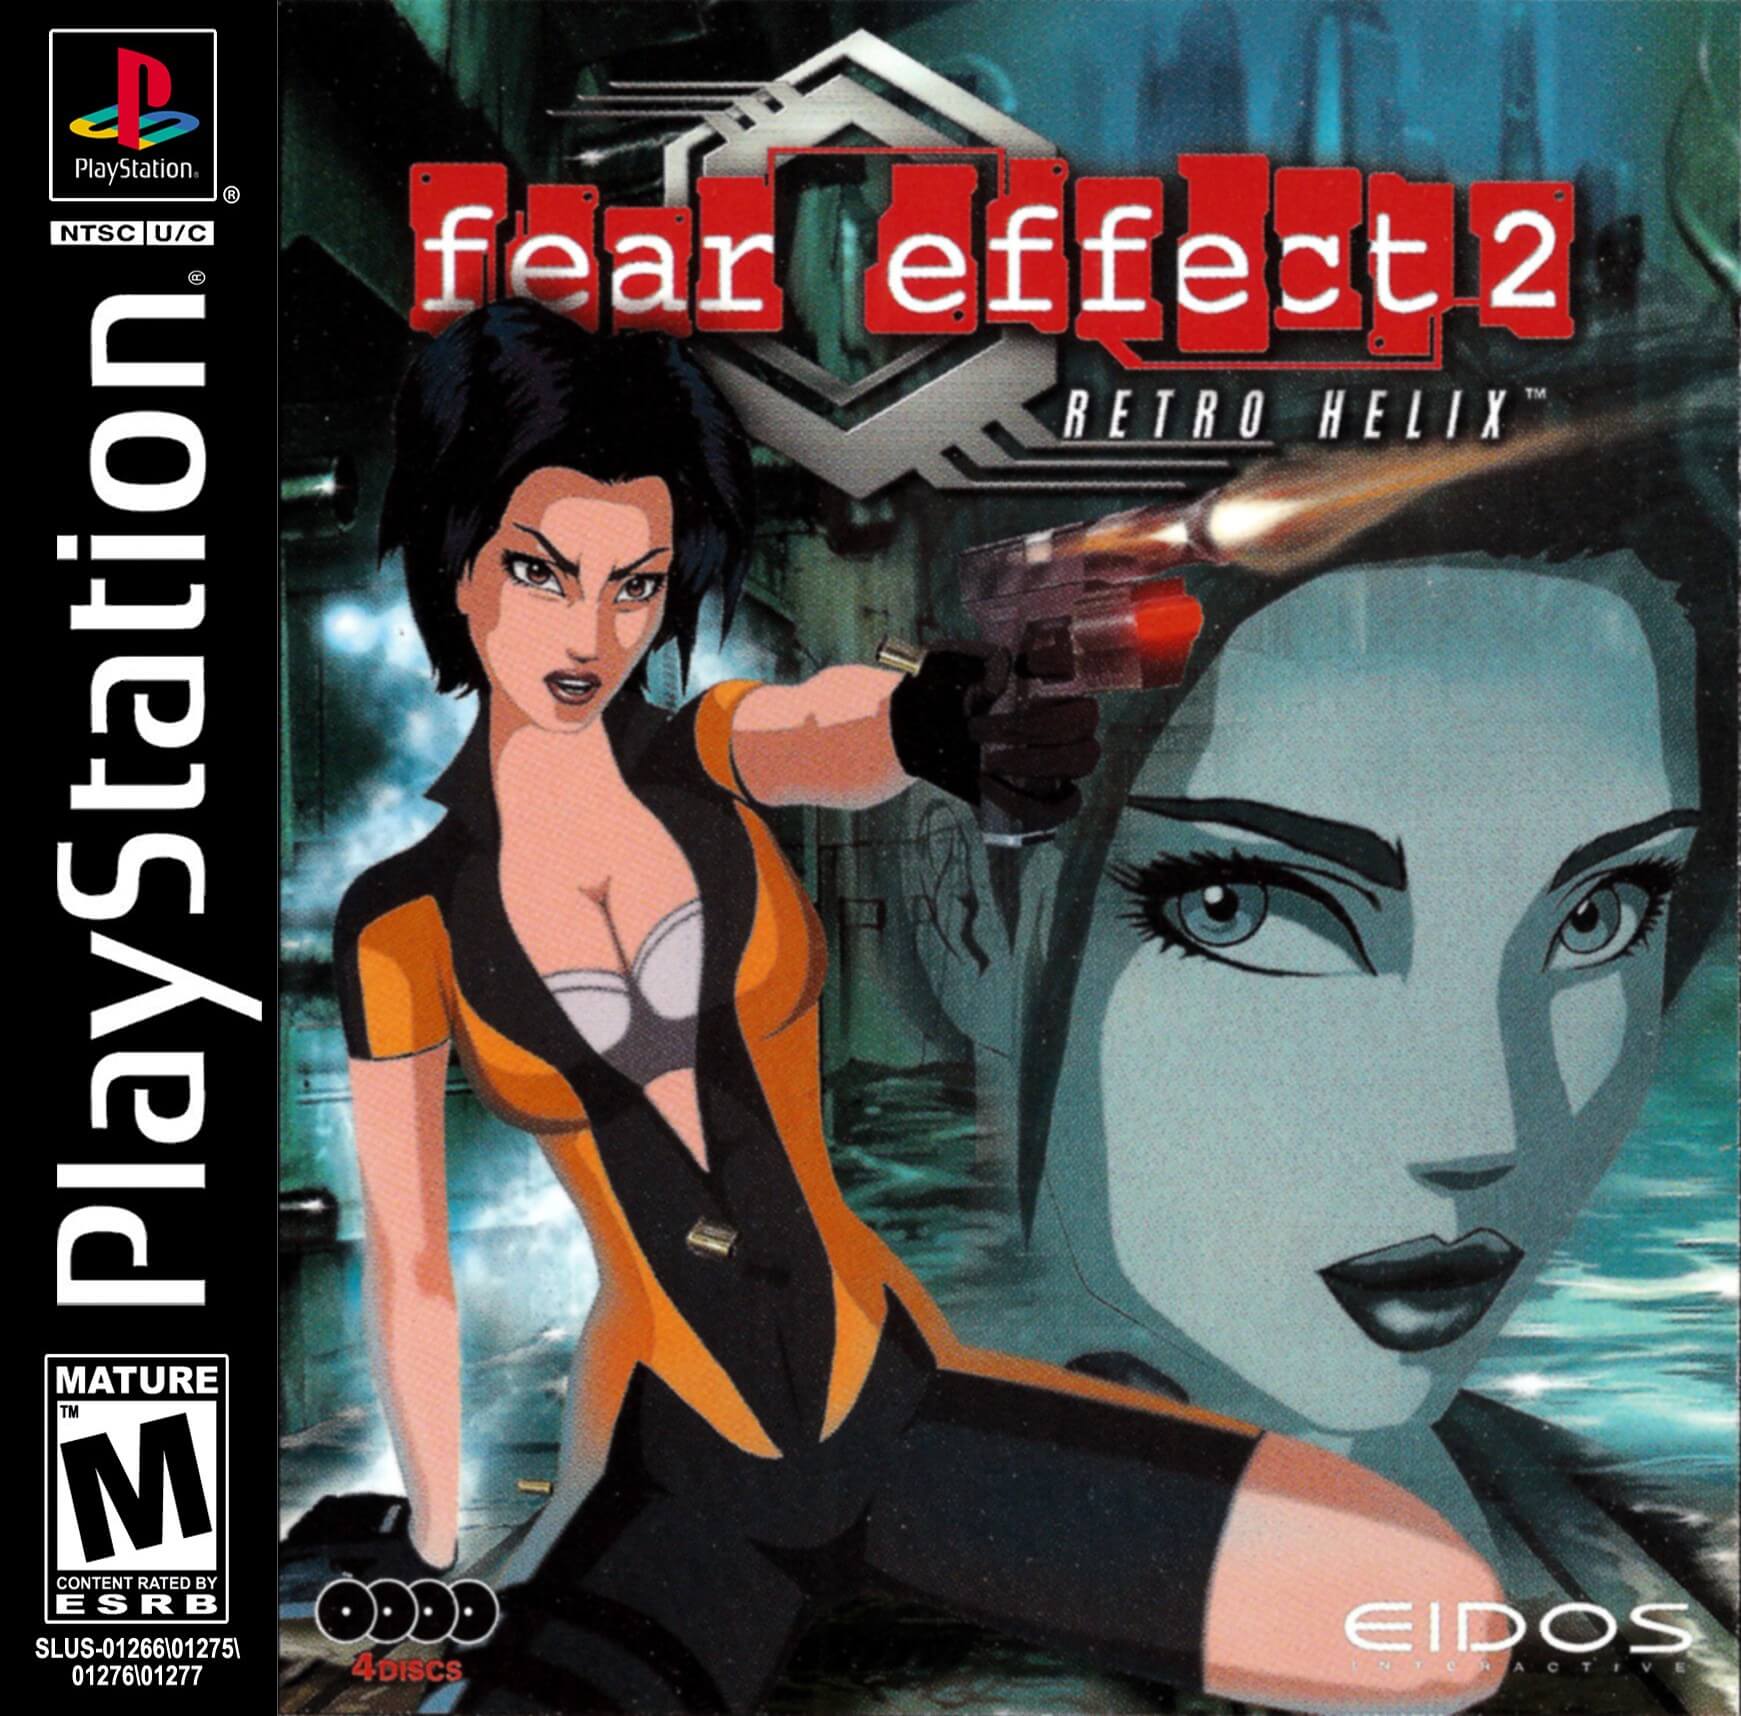 fear-effect-2-retro-helix-ps1-psx-rom-iso-download